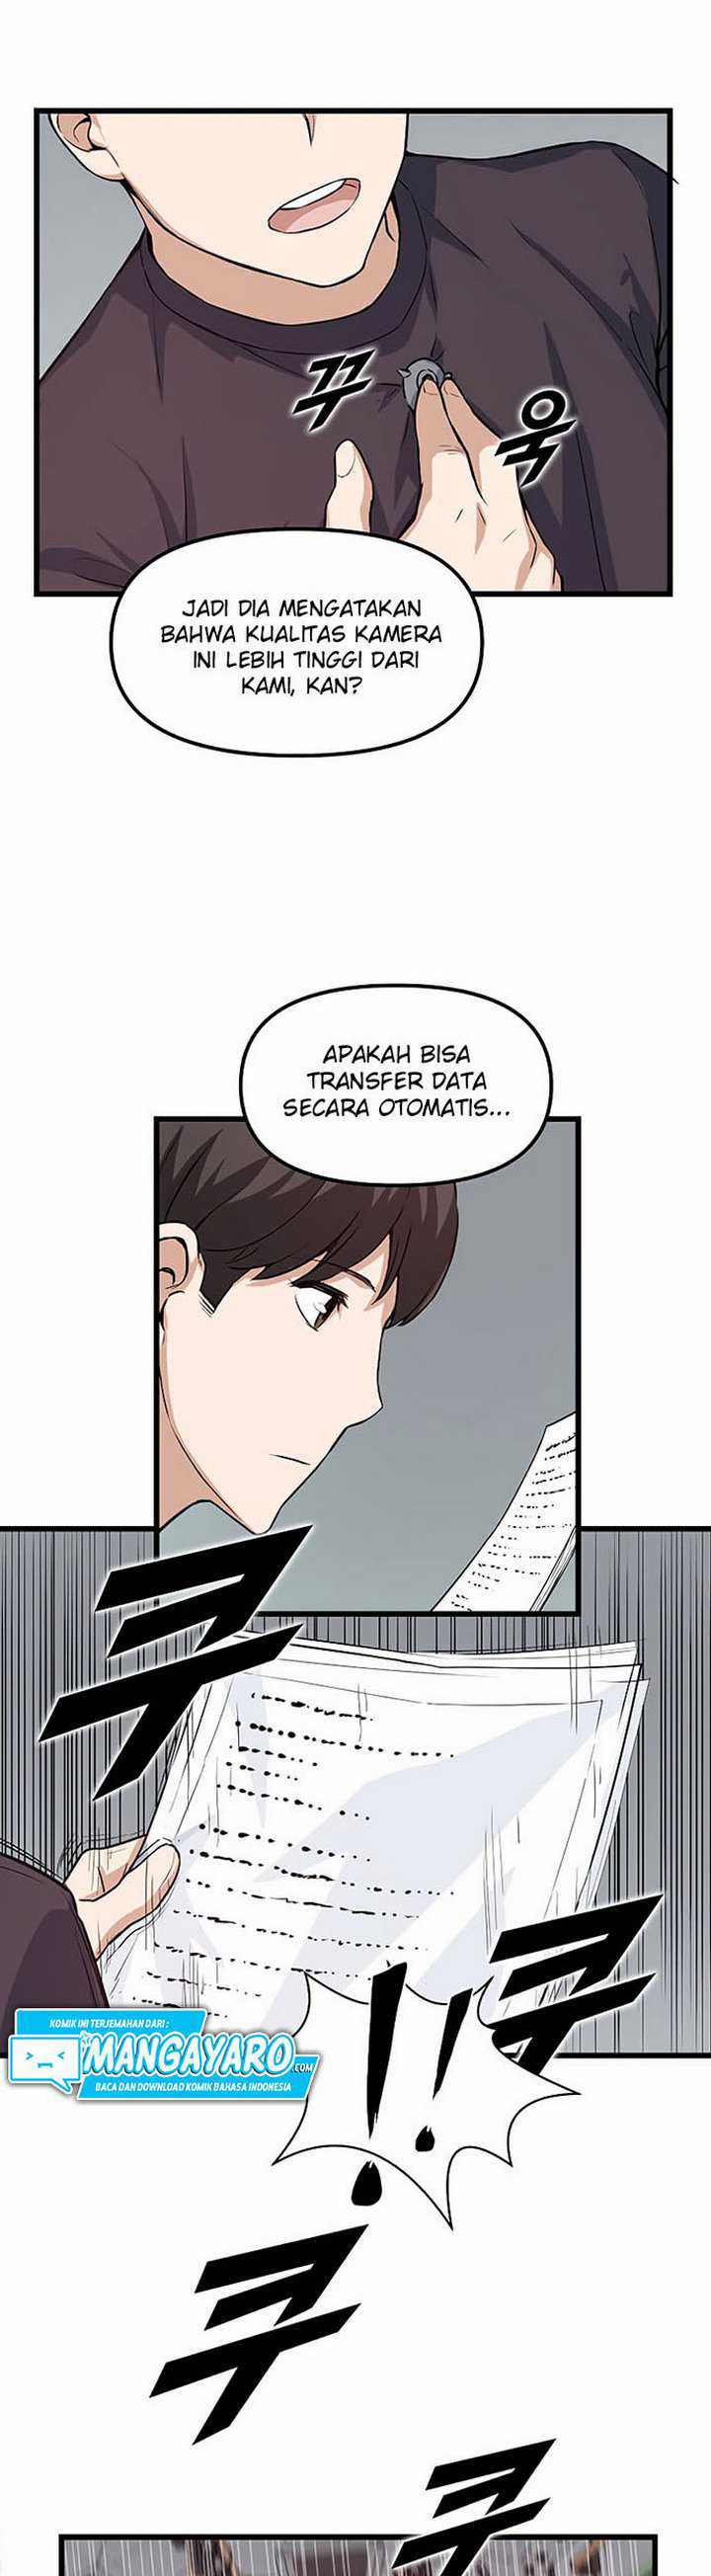 Leveling Up With Likes Chapter 05.1 Bahasa indonesia